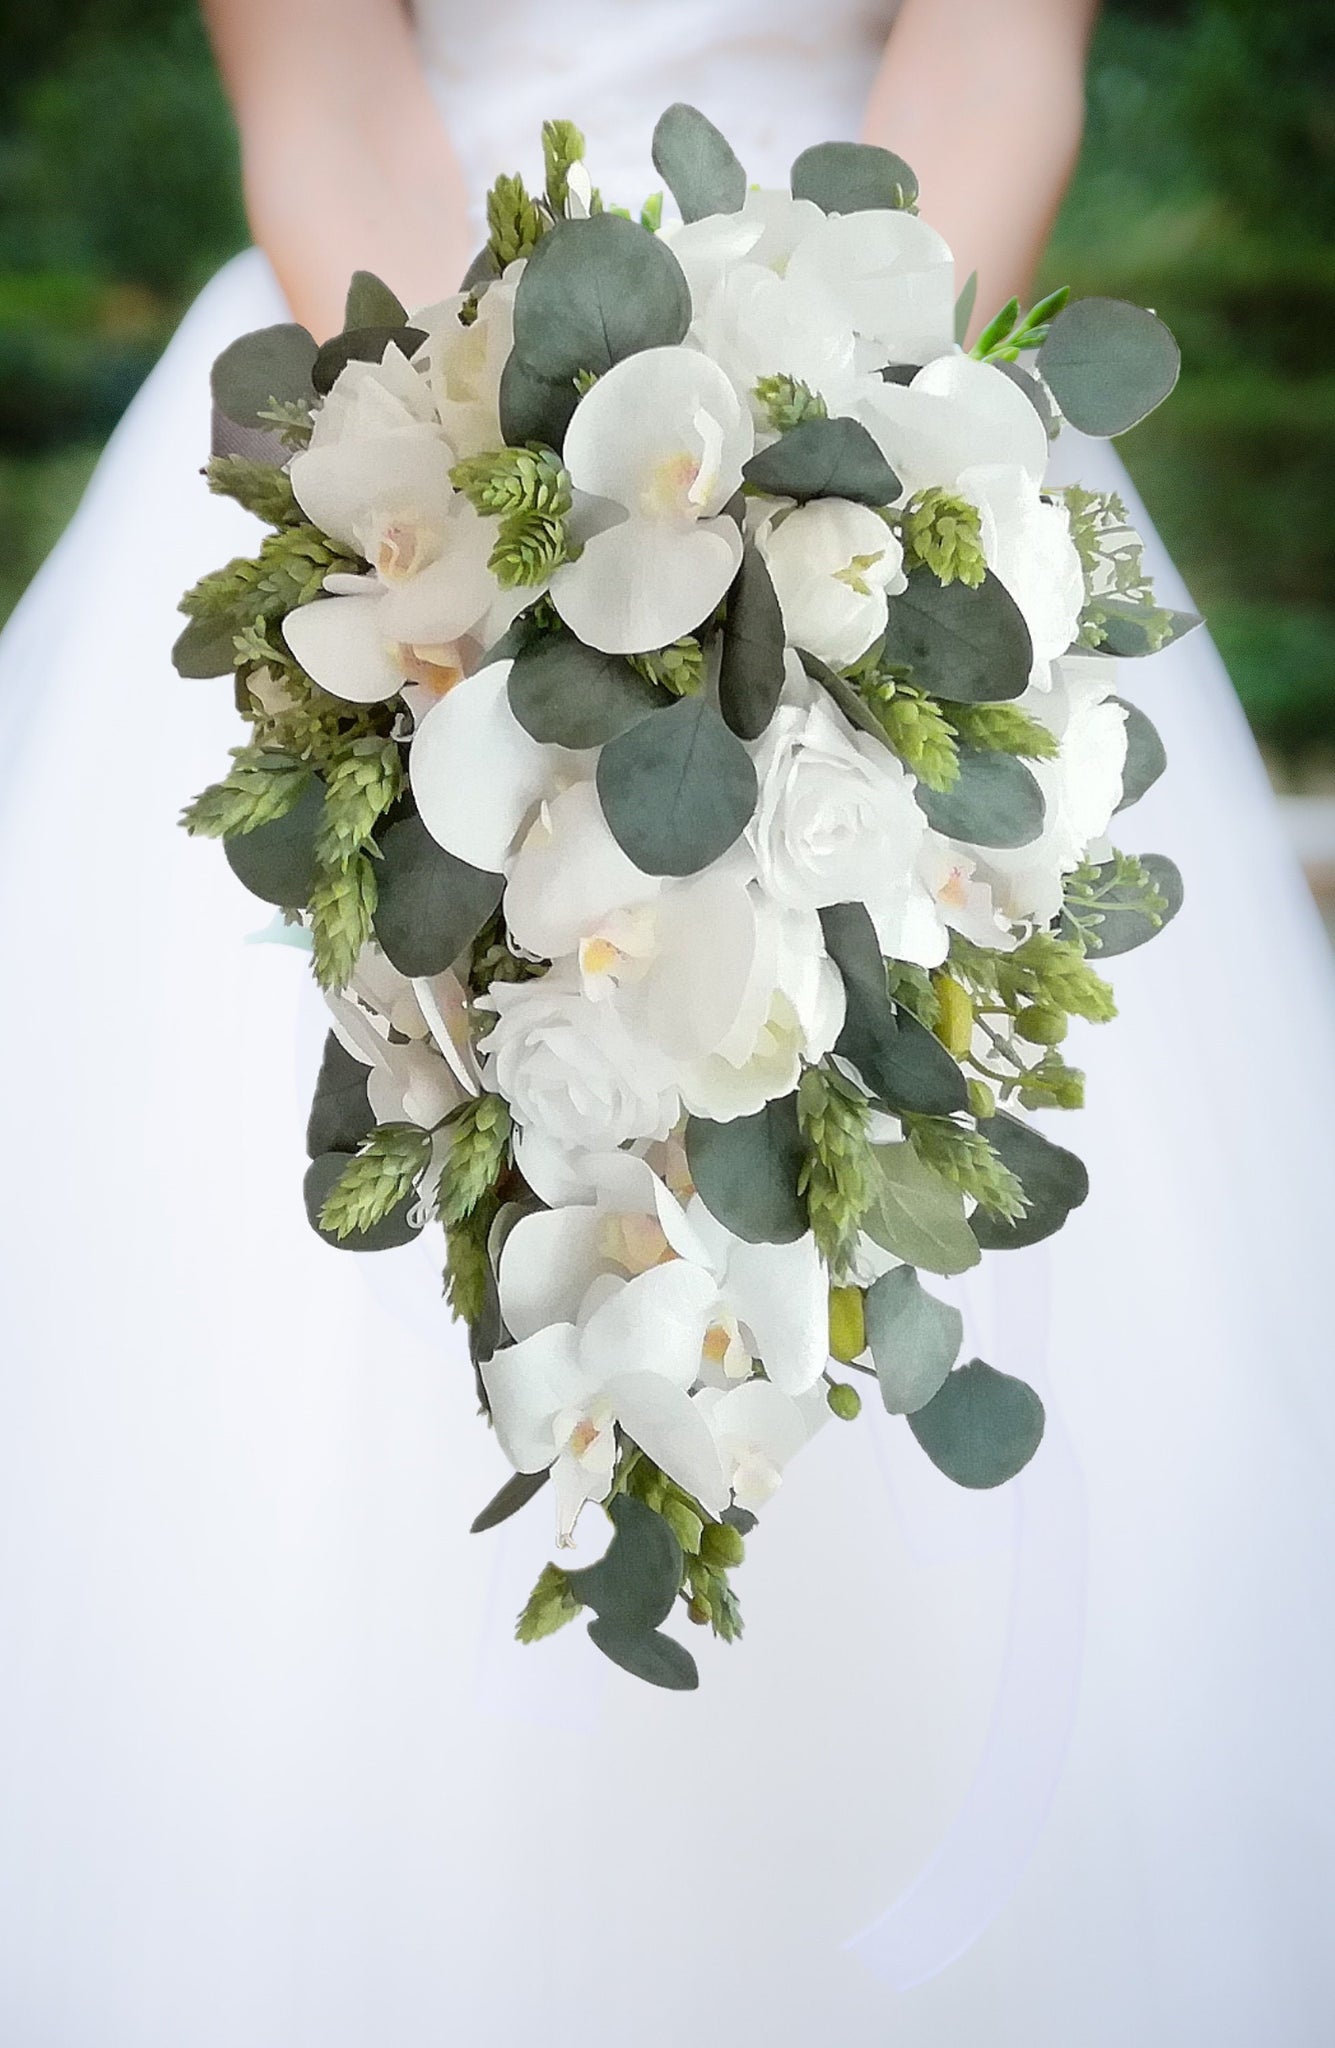 Eucalyptus Cascade Bridal Bouquet - Hops Real Touch Orchids White Peonies Roses - Add a Groom's Boutonniere Bridesmaids & More